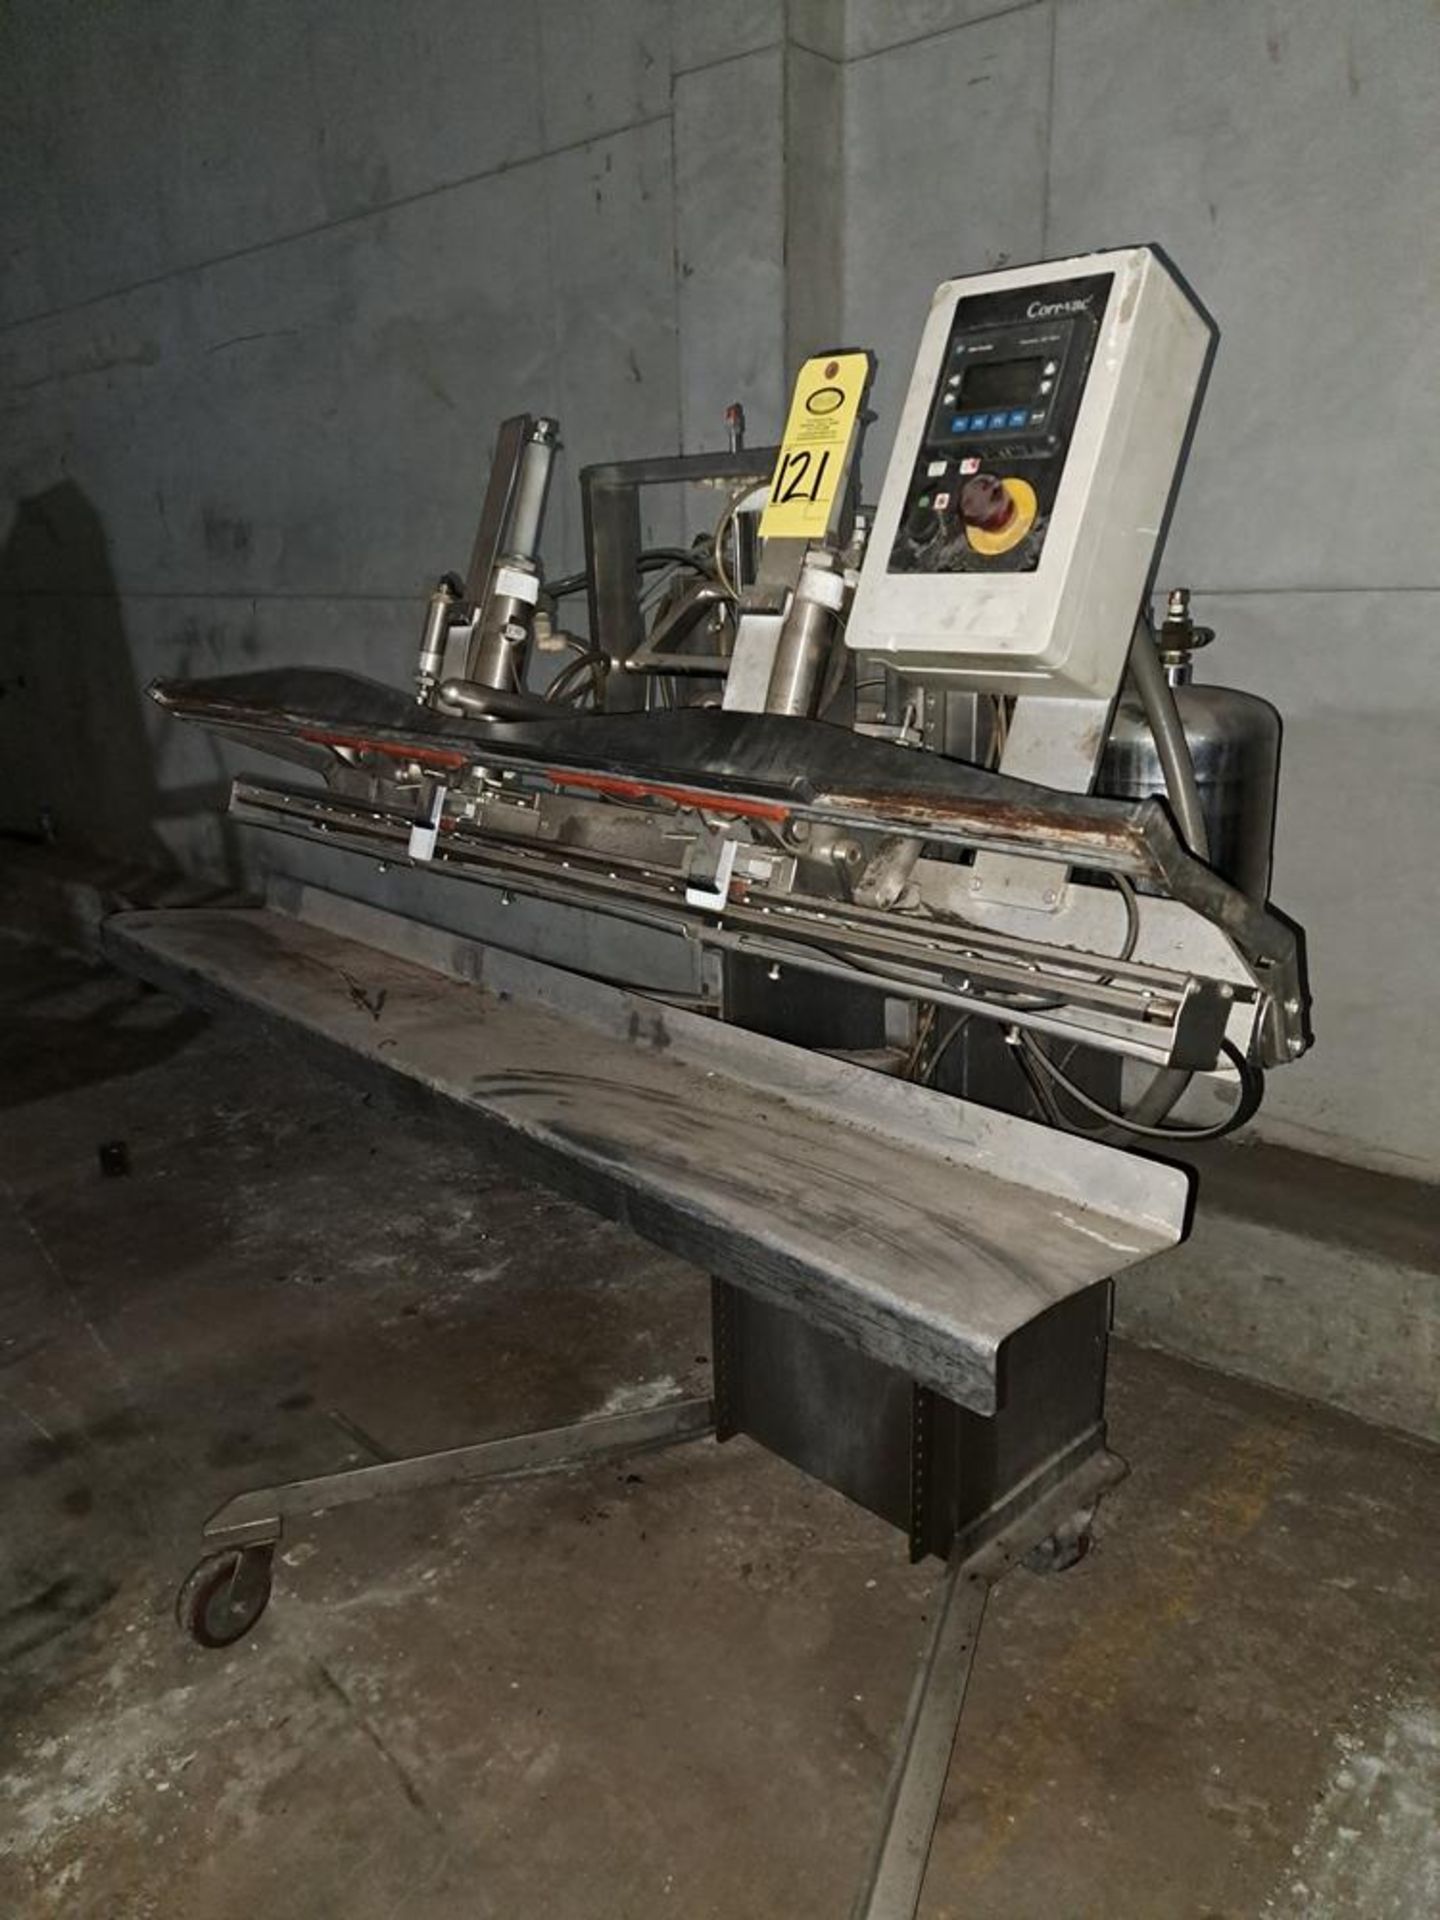 M-Tec Mdl. Corr-Vac Bag Sealer, Ser. #1391-0, 54" seal bar (out of service): Required Loading Fee $